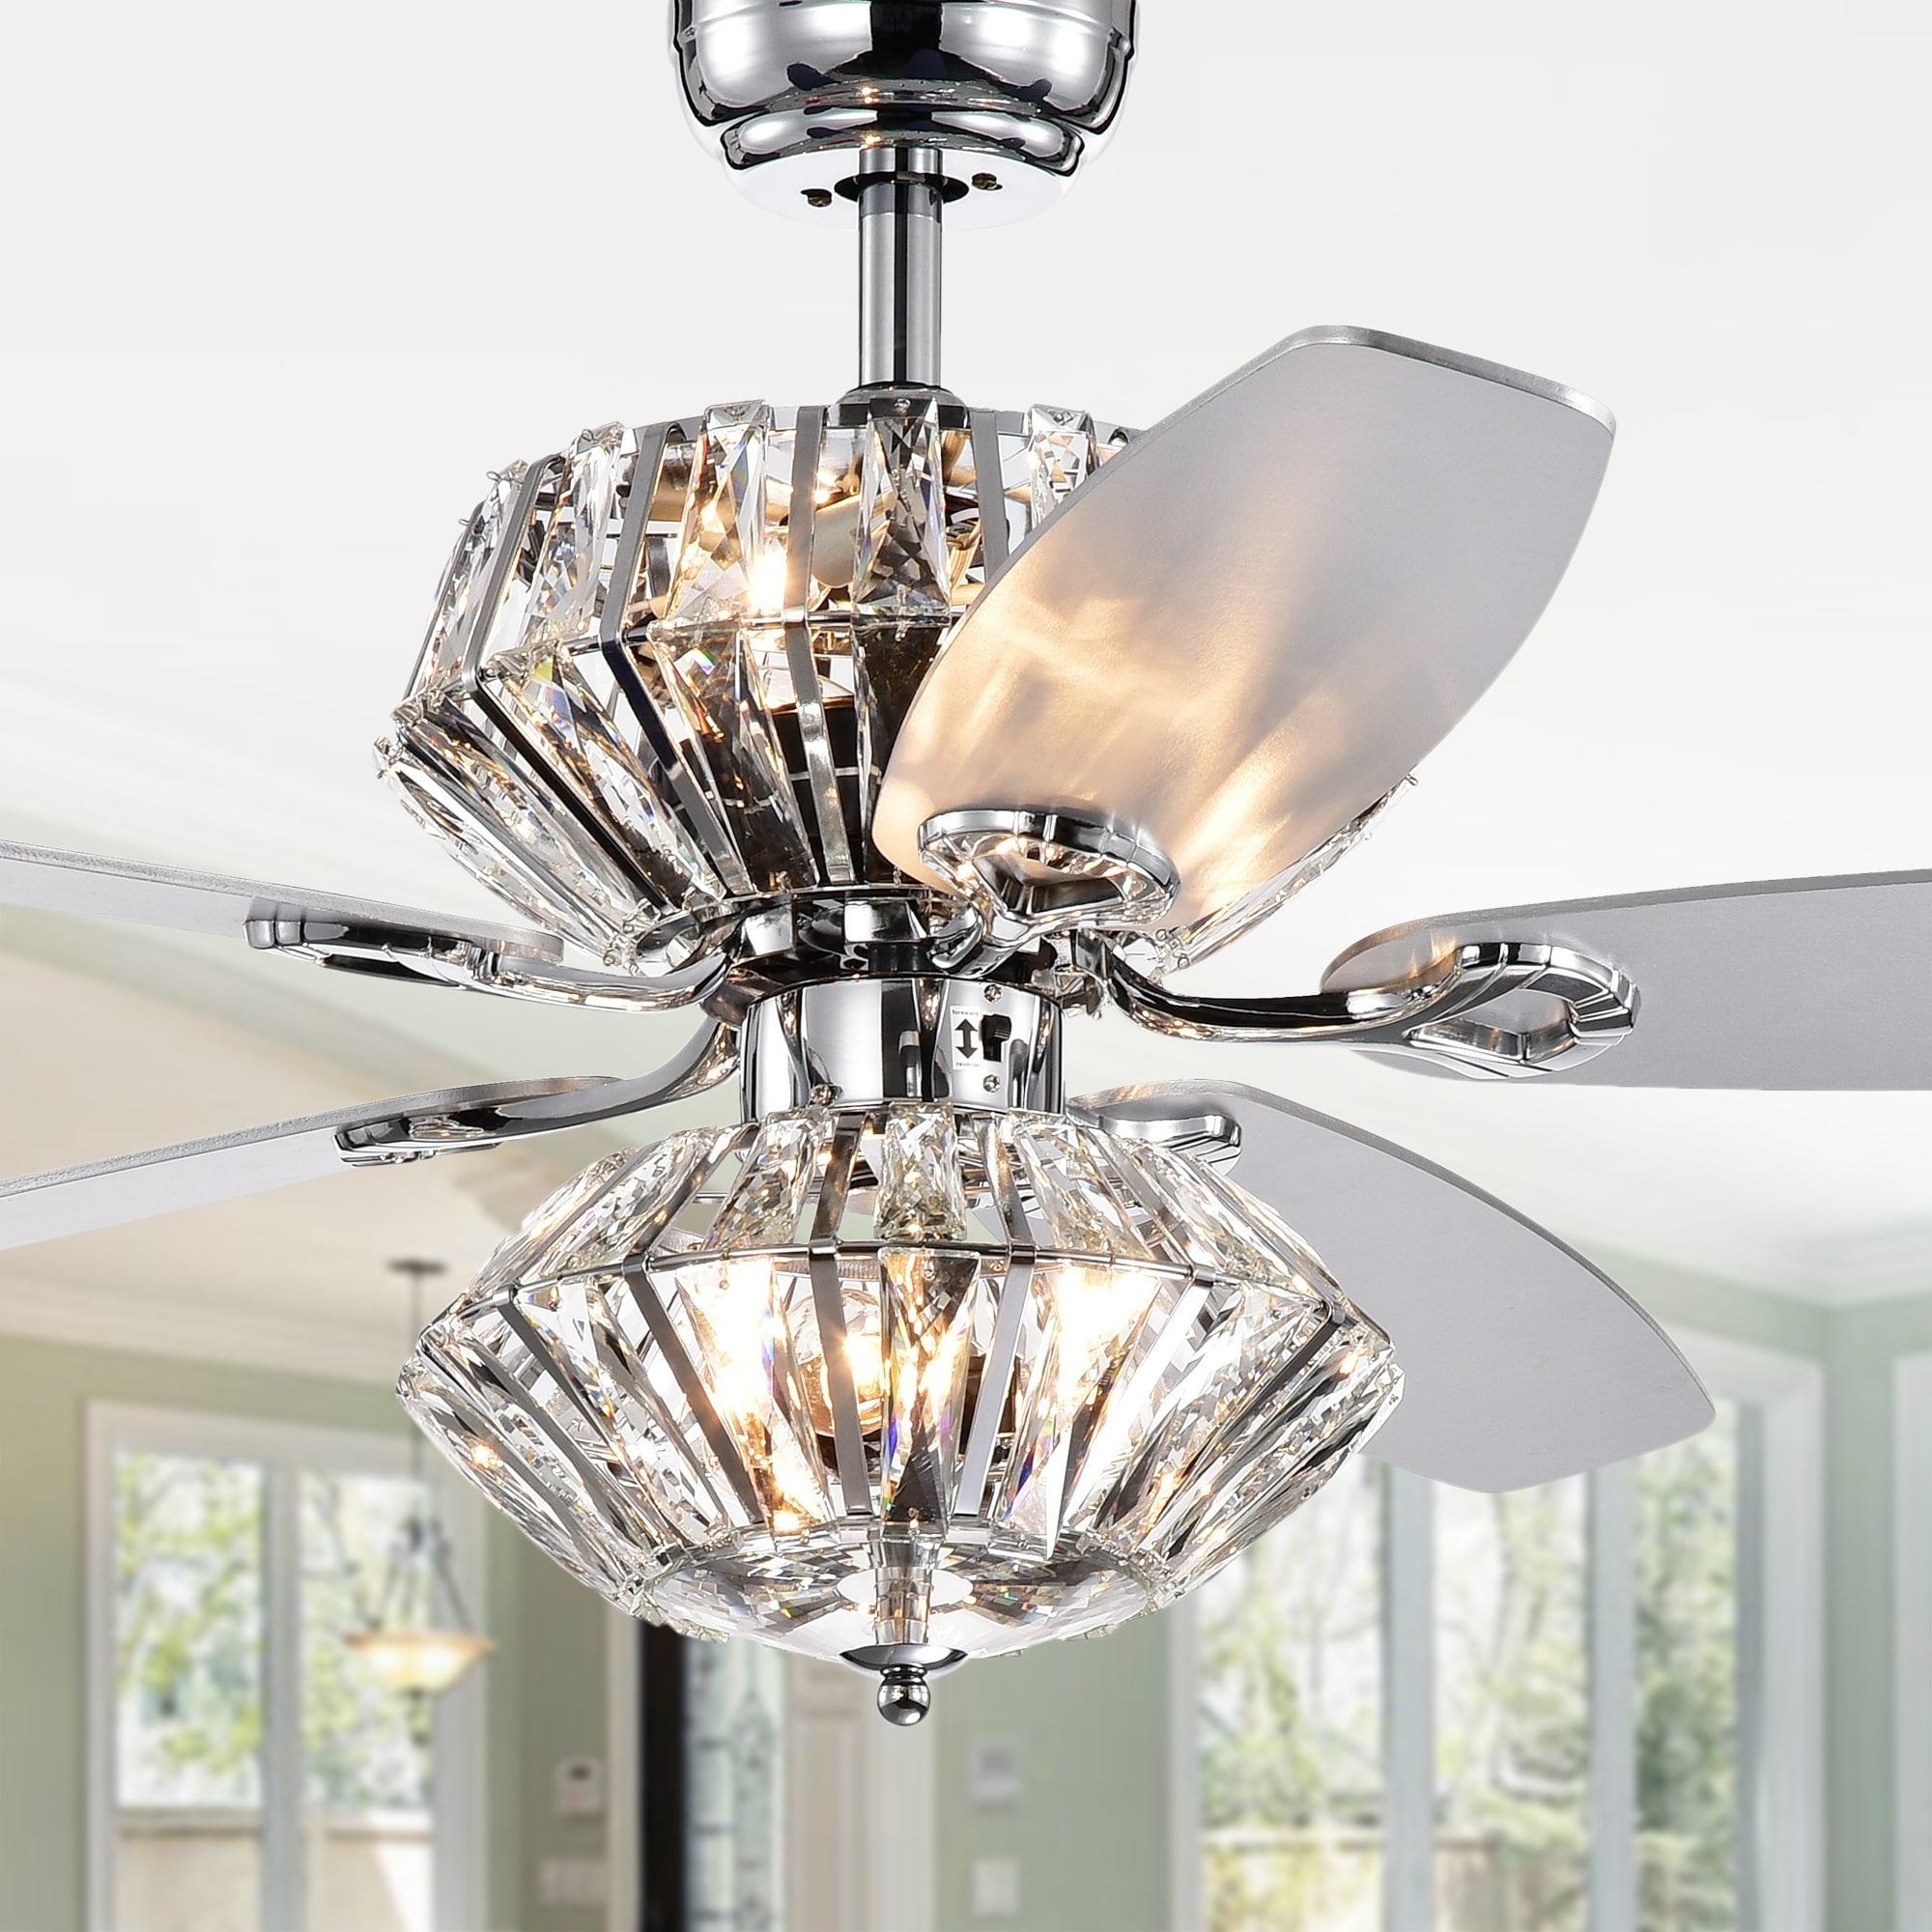 Copper Grove Toshevo RC Chrome Dual-lamp 52-inch Lighted Ceiling Fan w/ Crystal Shades and Reversible Blades